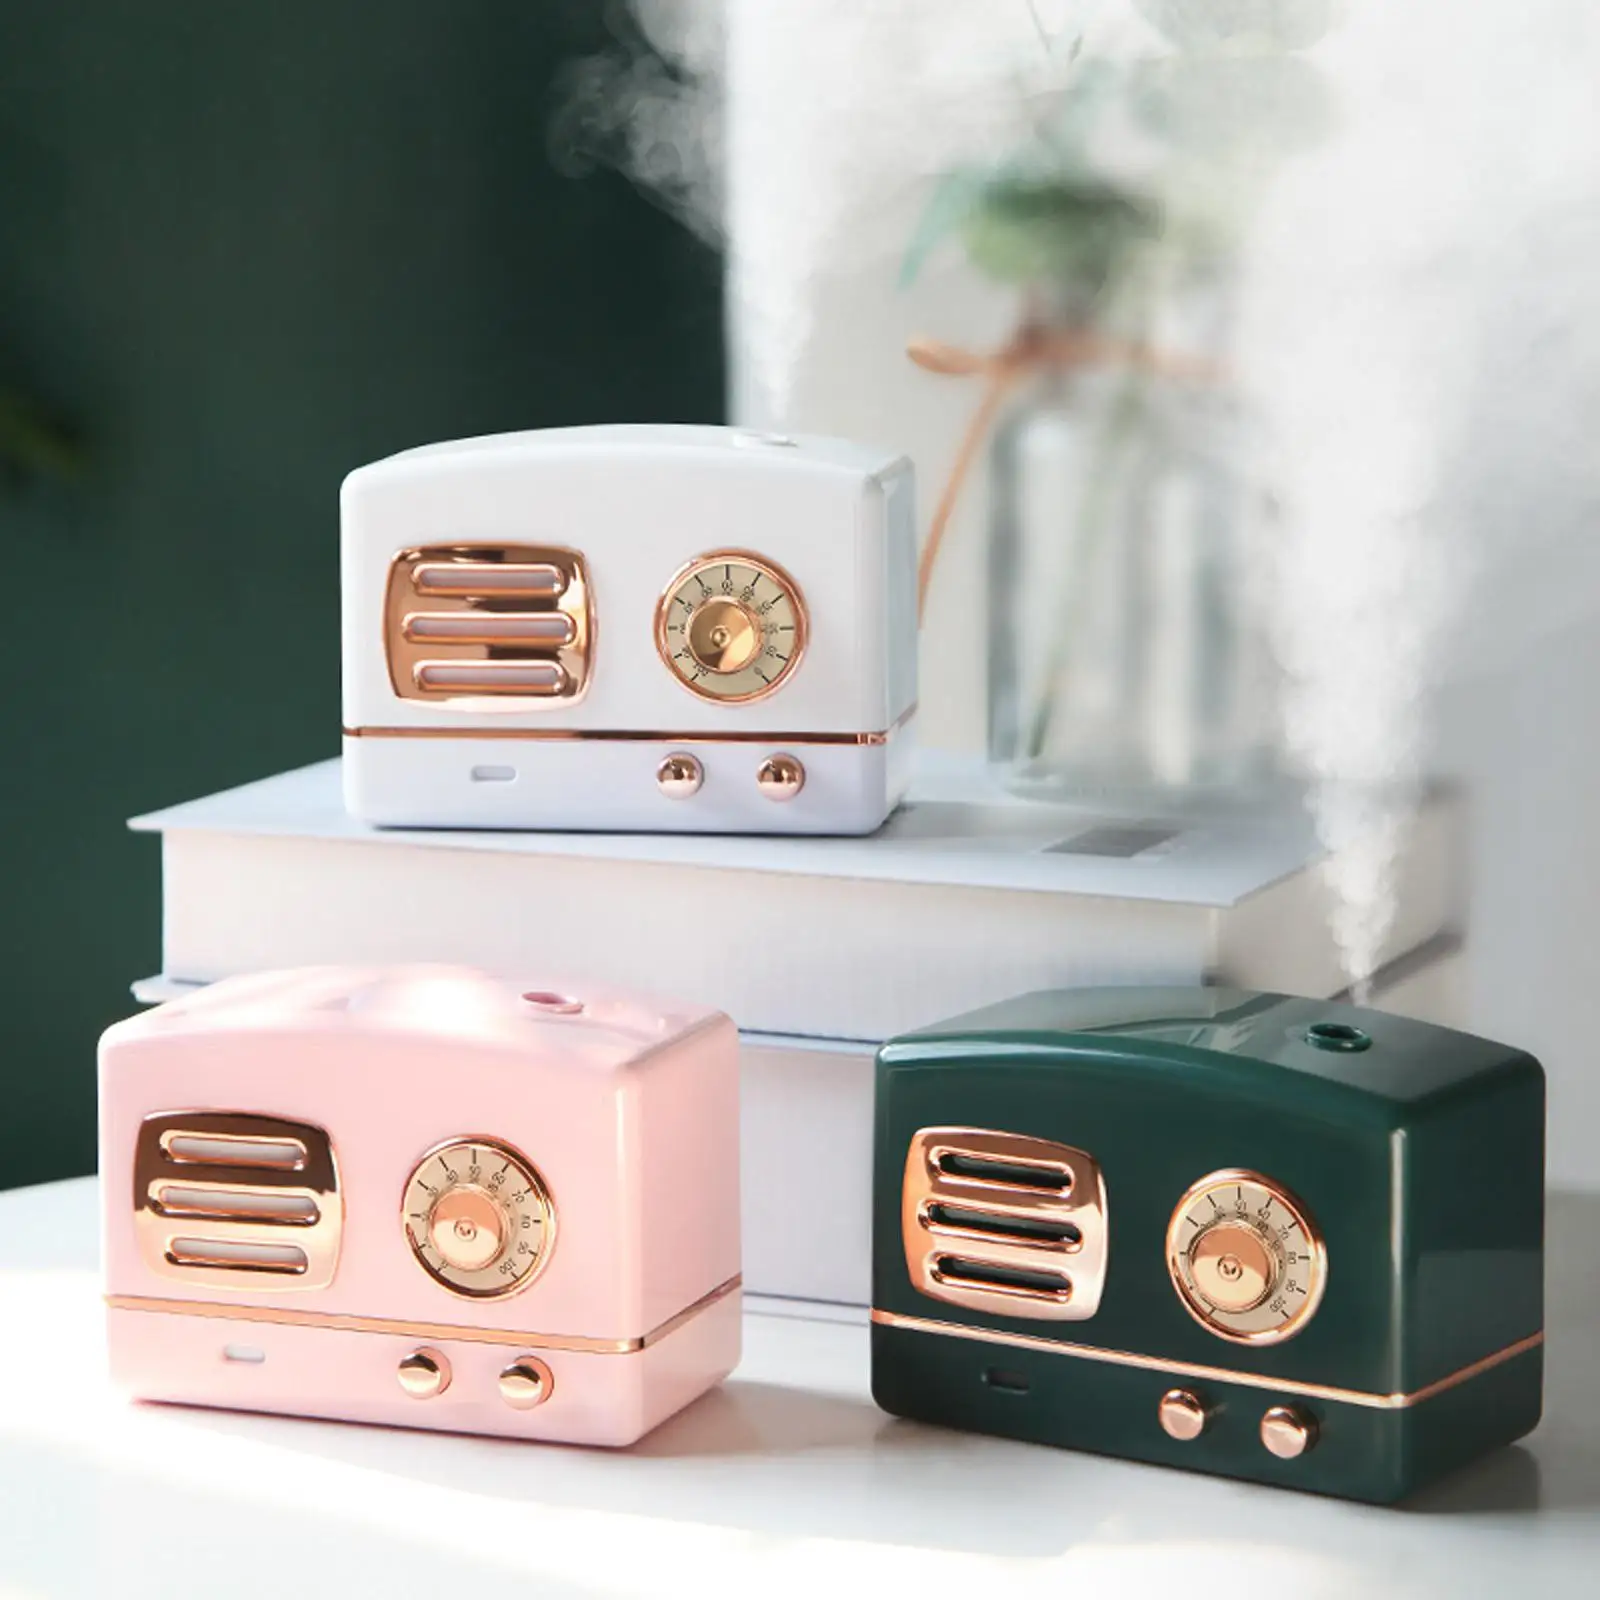 Portable Air Humidifier Aroma Essential Oil Diffuser Retro Quiet USB Night Light for Home Living Room Bedroom Yoga Car